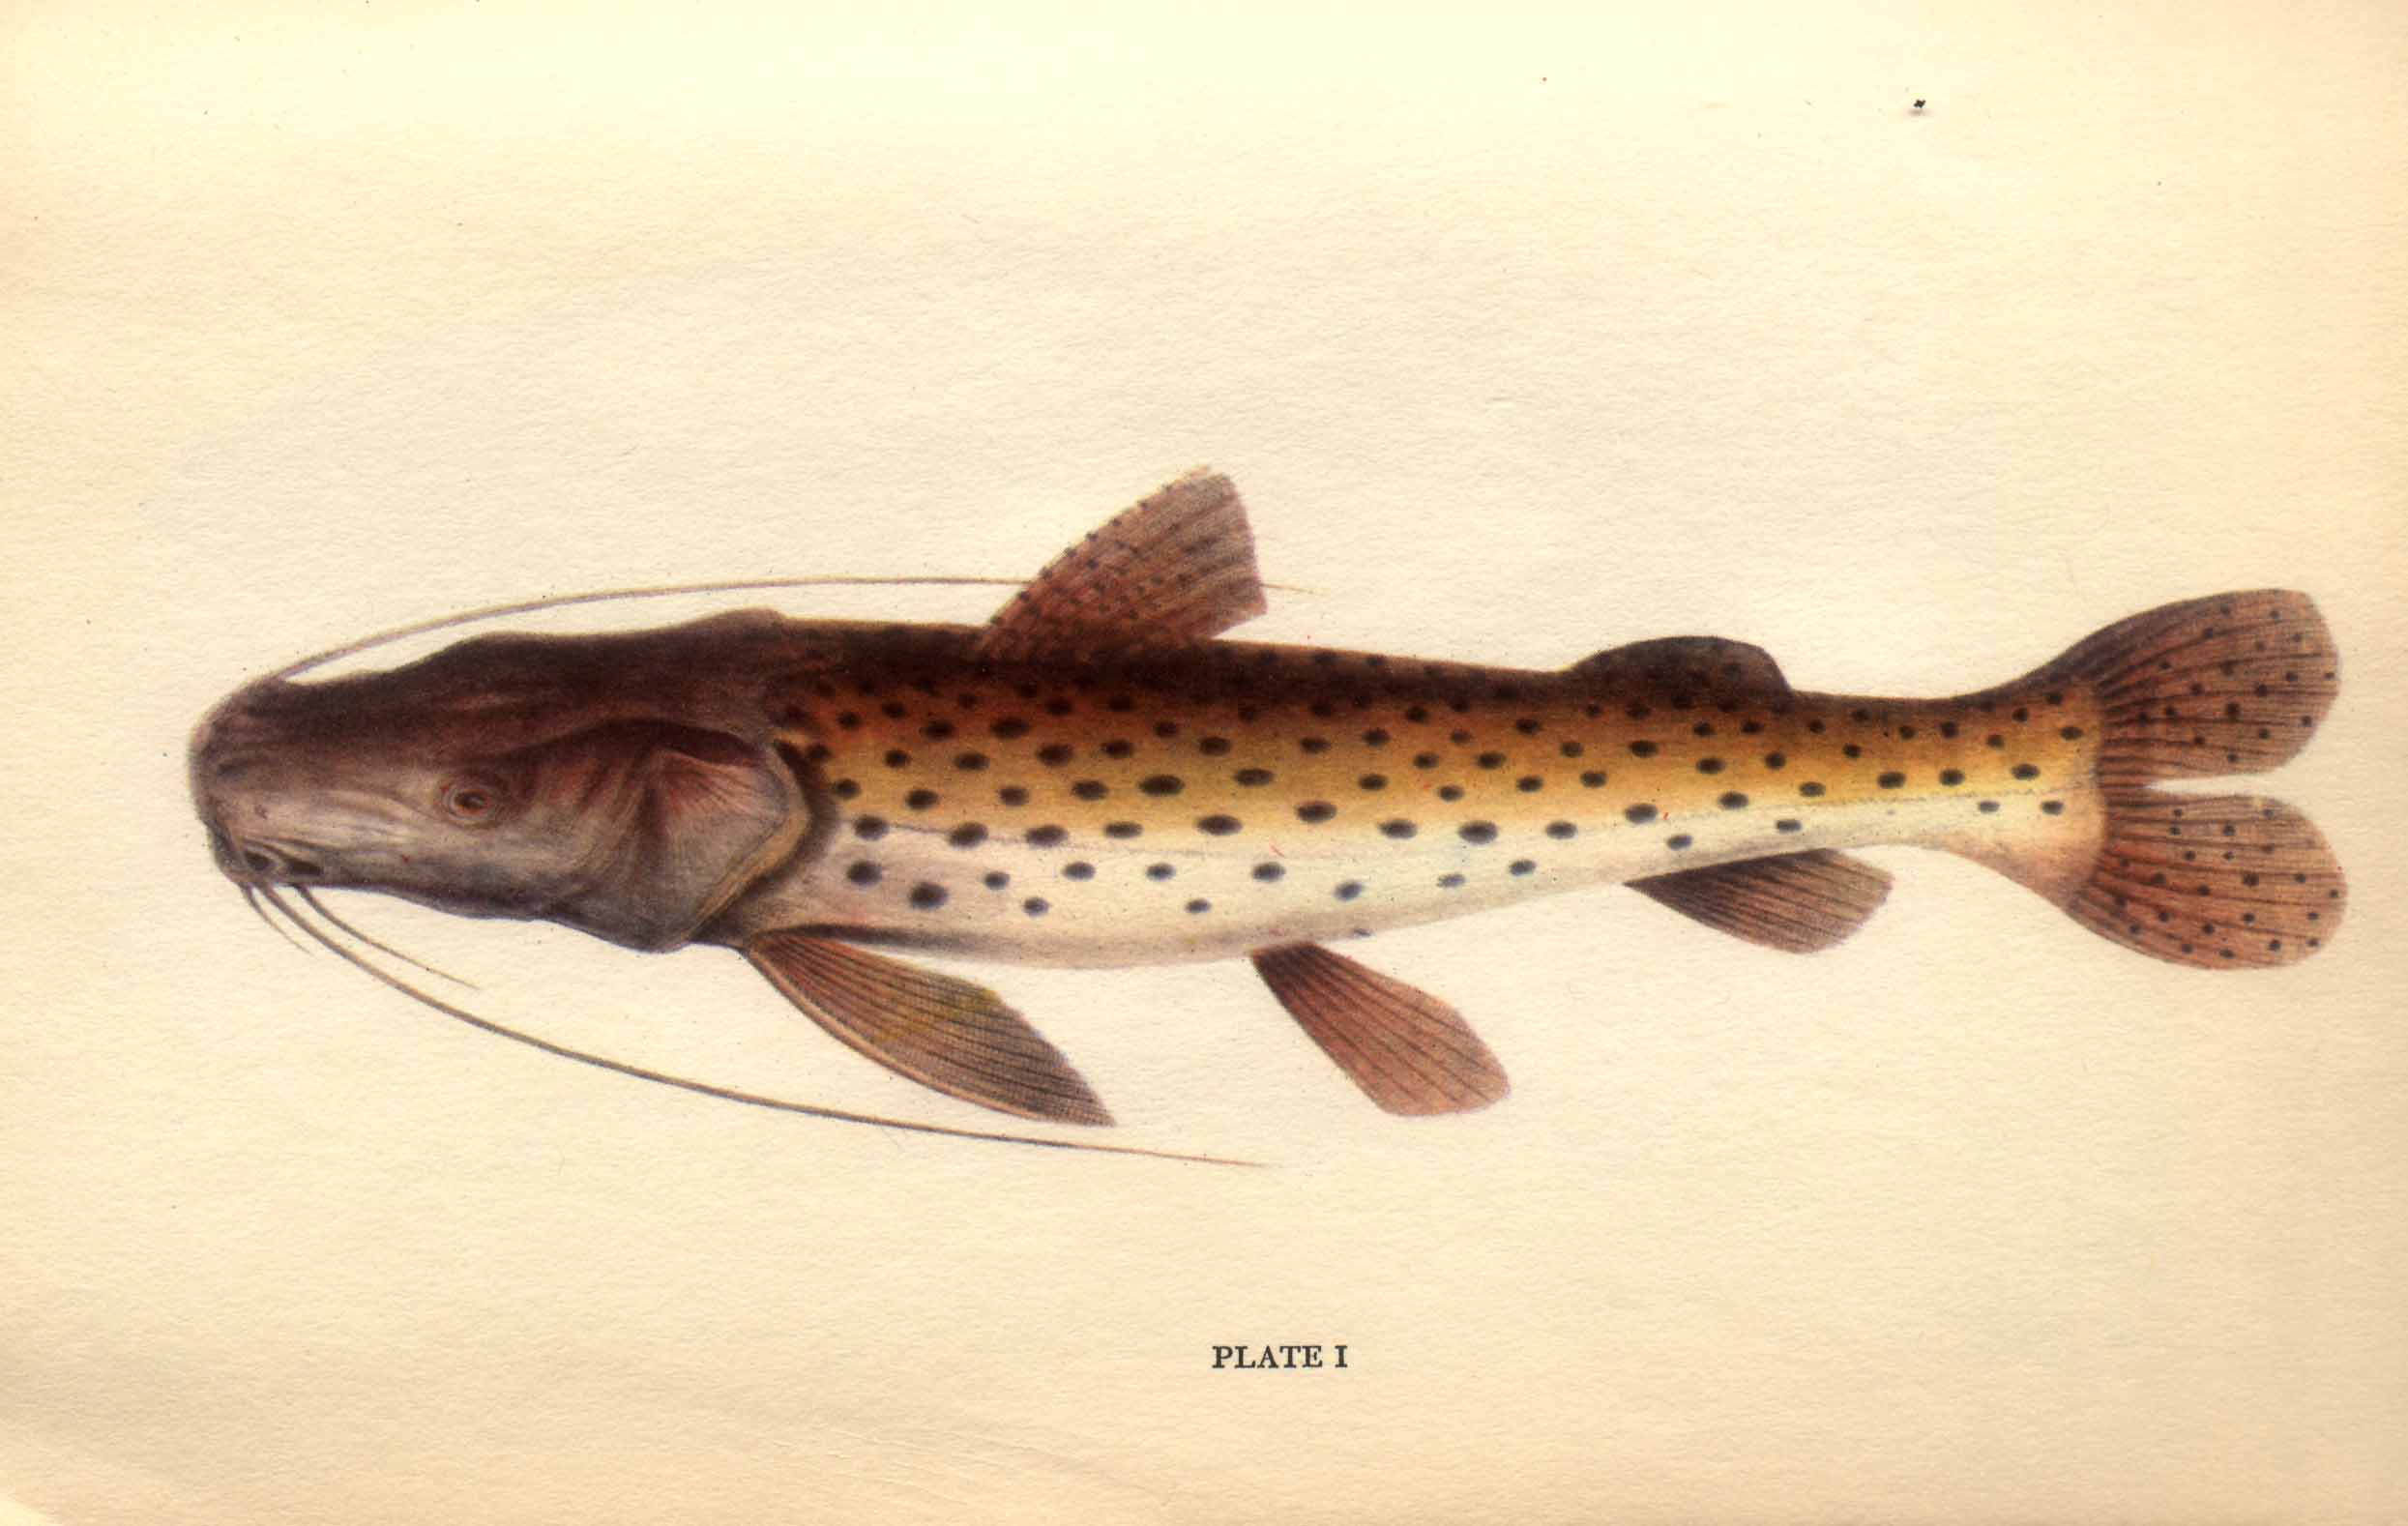 Fish with long whiskers. Caption: Plate I.